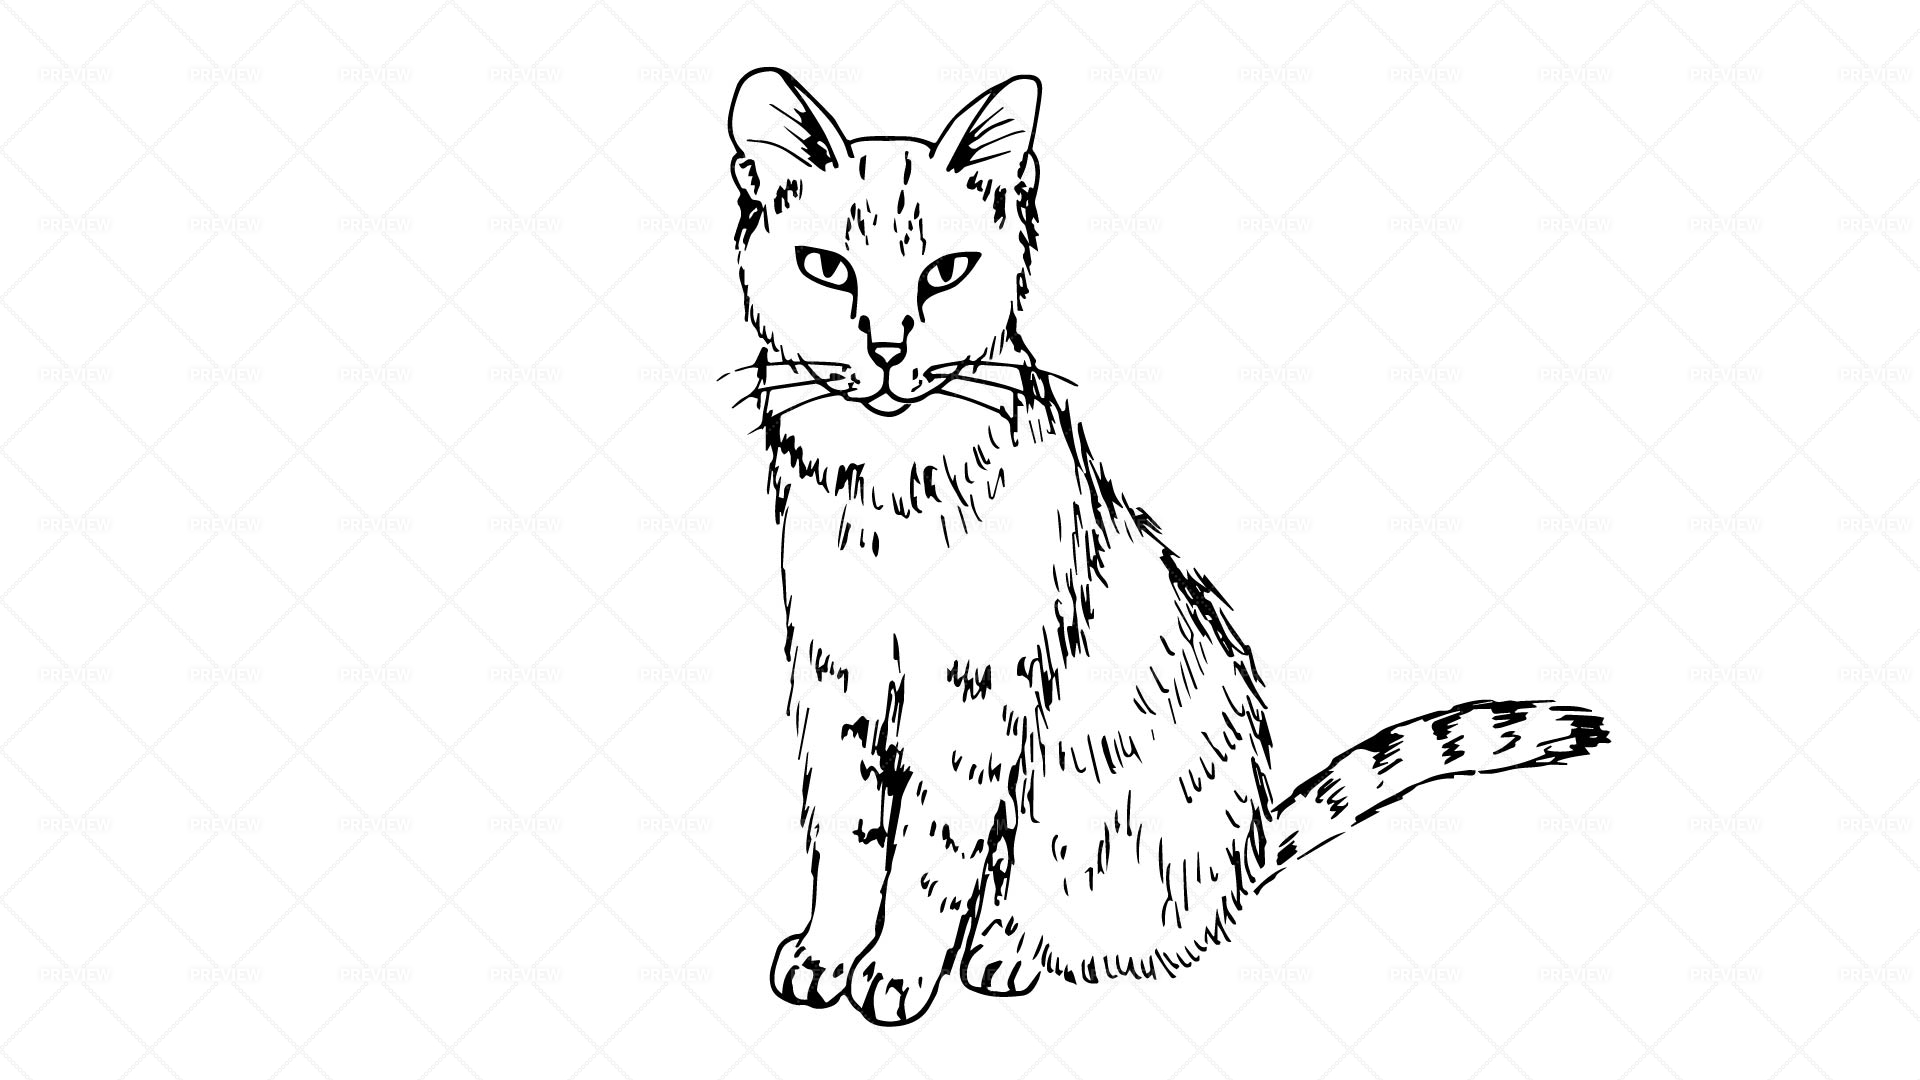 Hand Drawn Vector. Cute Cat Sitting and Smiling Stock Vector - Illustration  of drawing, cute: 175185838